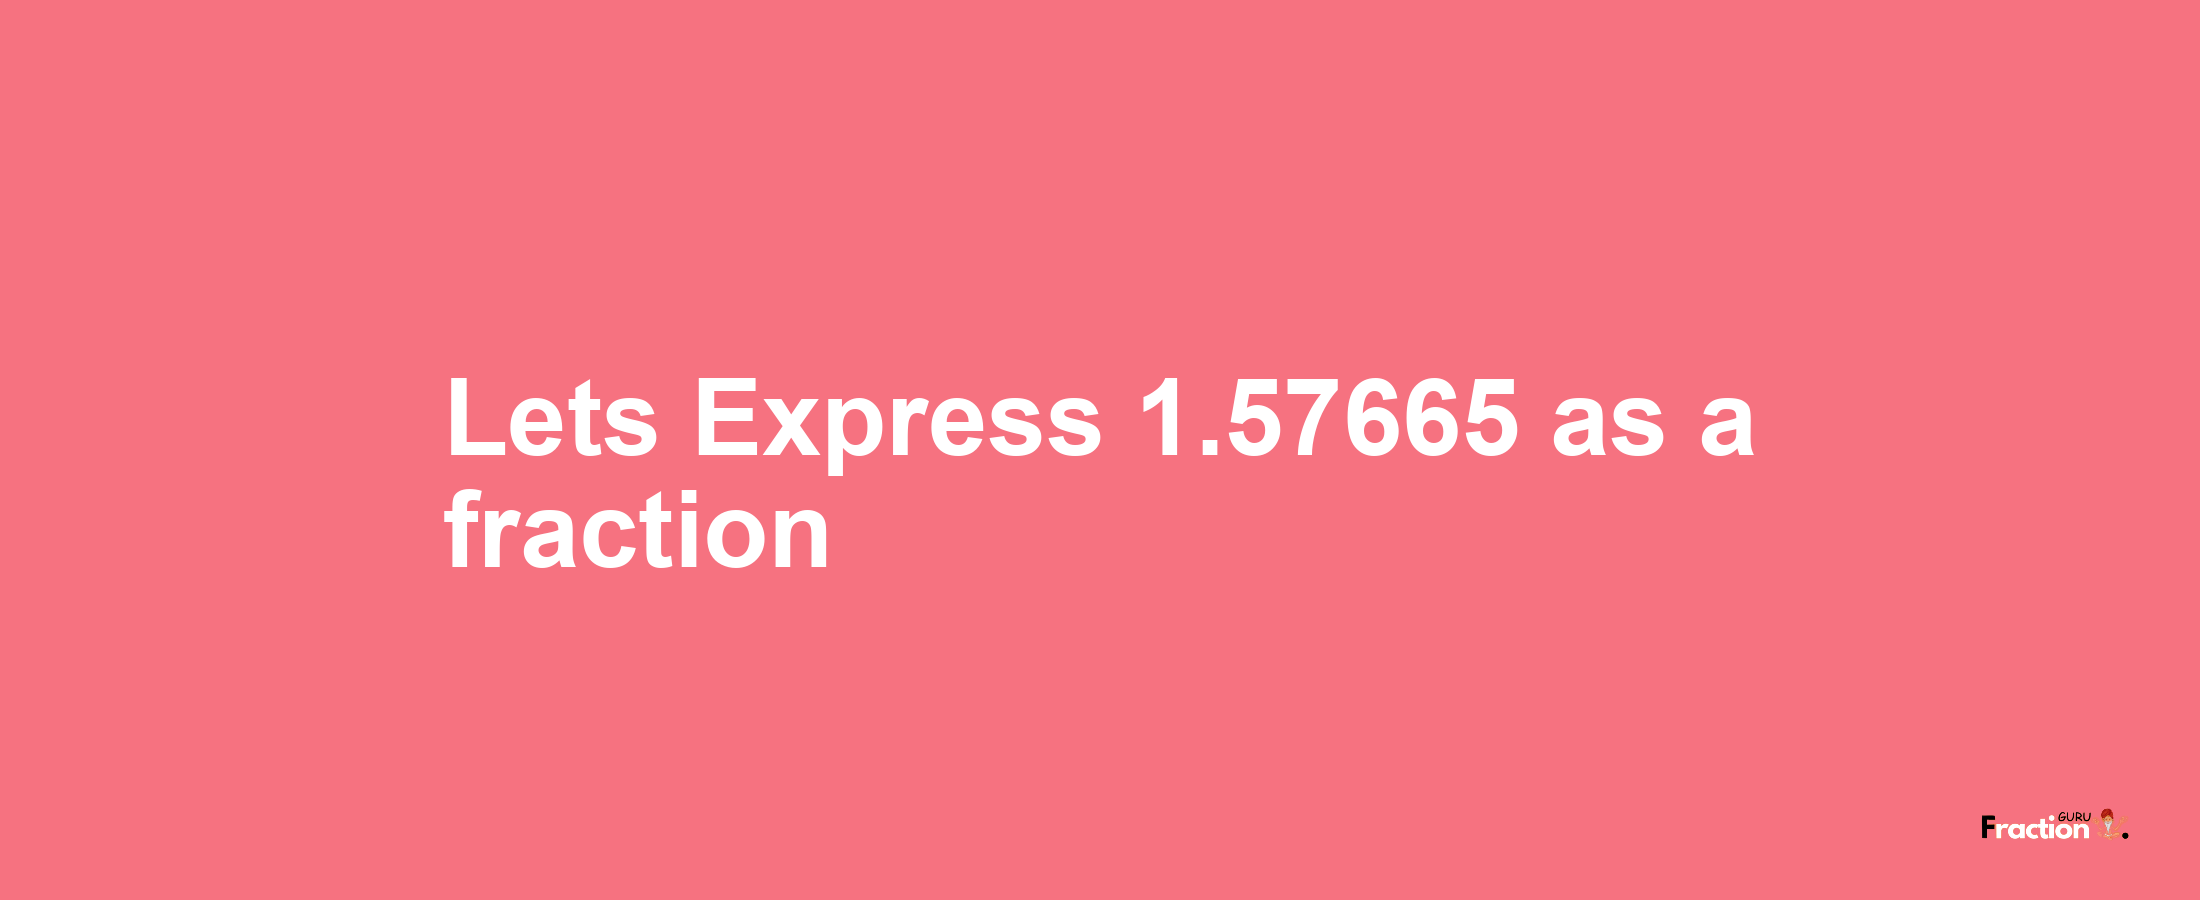 Lets Express 1.57665 as afraction